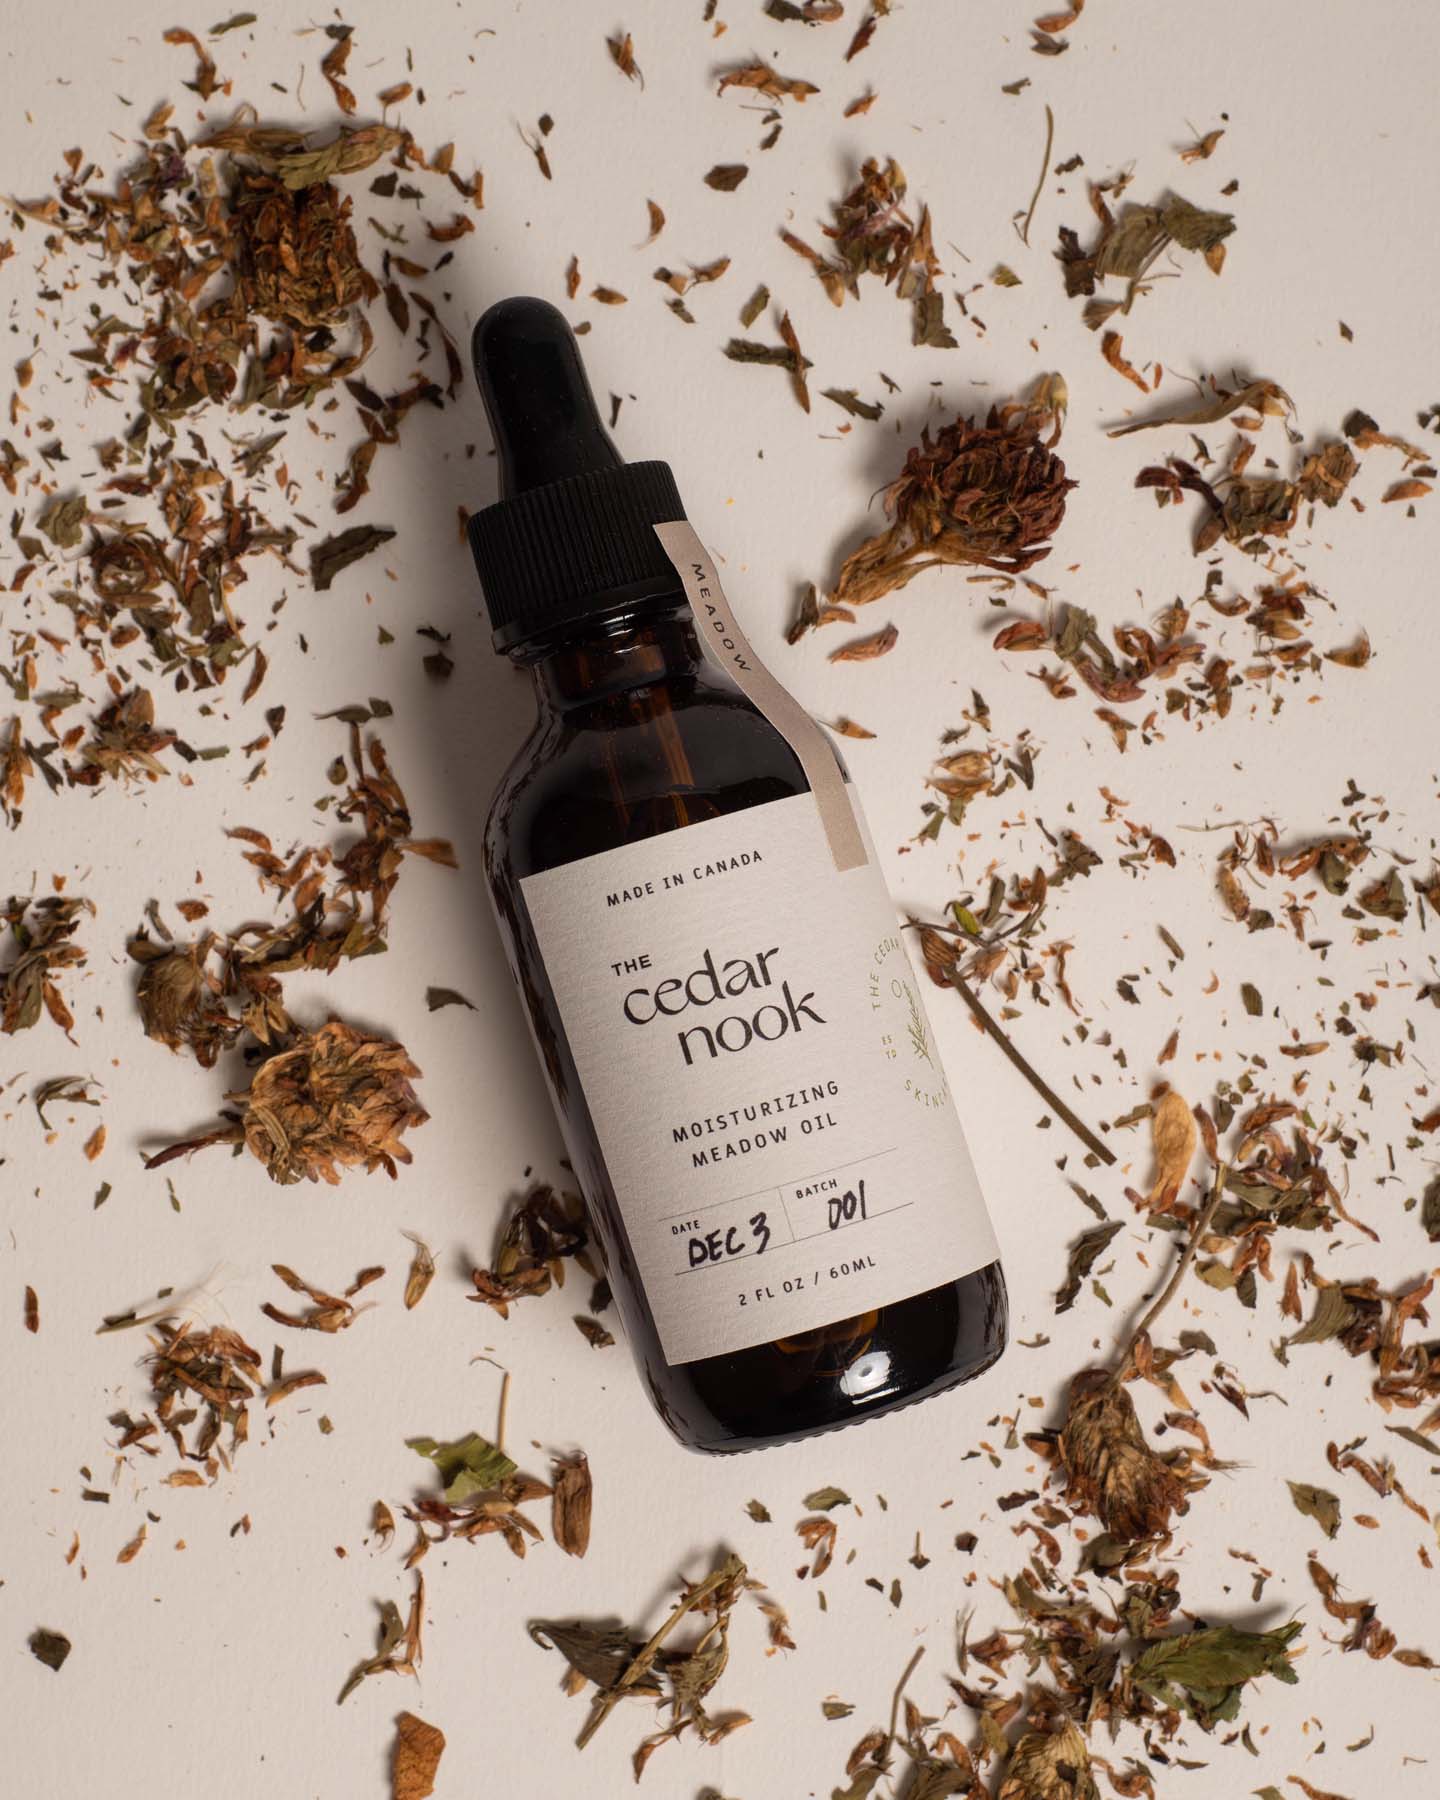 Moisturizing Meadow Oil | The Cedar Nook Face Oil in a 2 oz amber glass bottle with dropper top in a flat lay view and foraged red clover blossoms sprinkled all around a white background